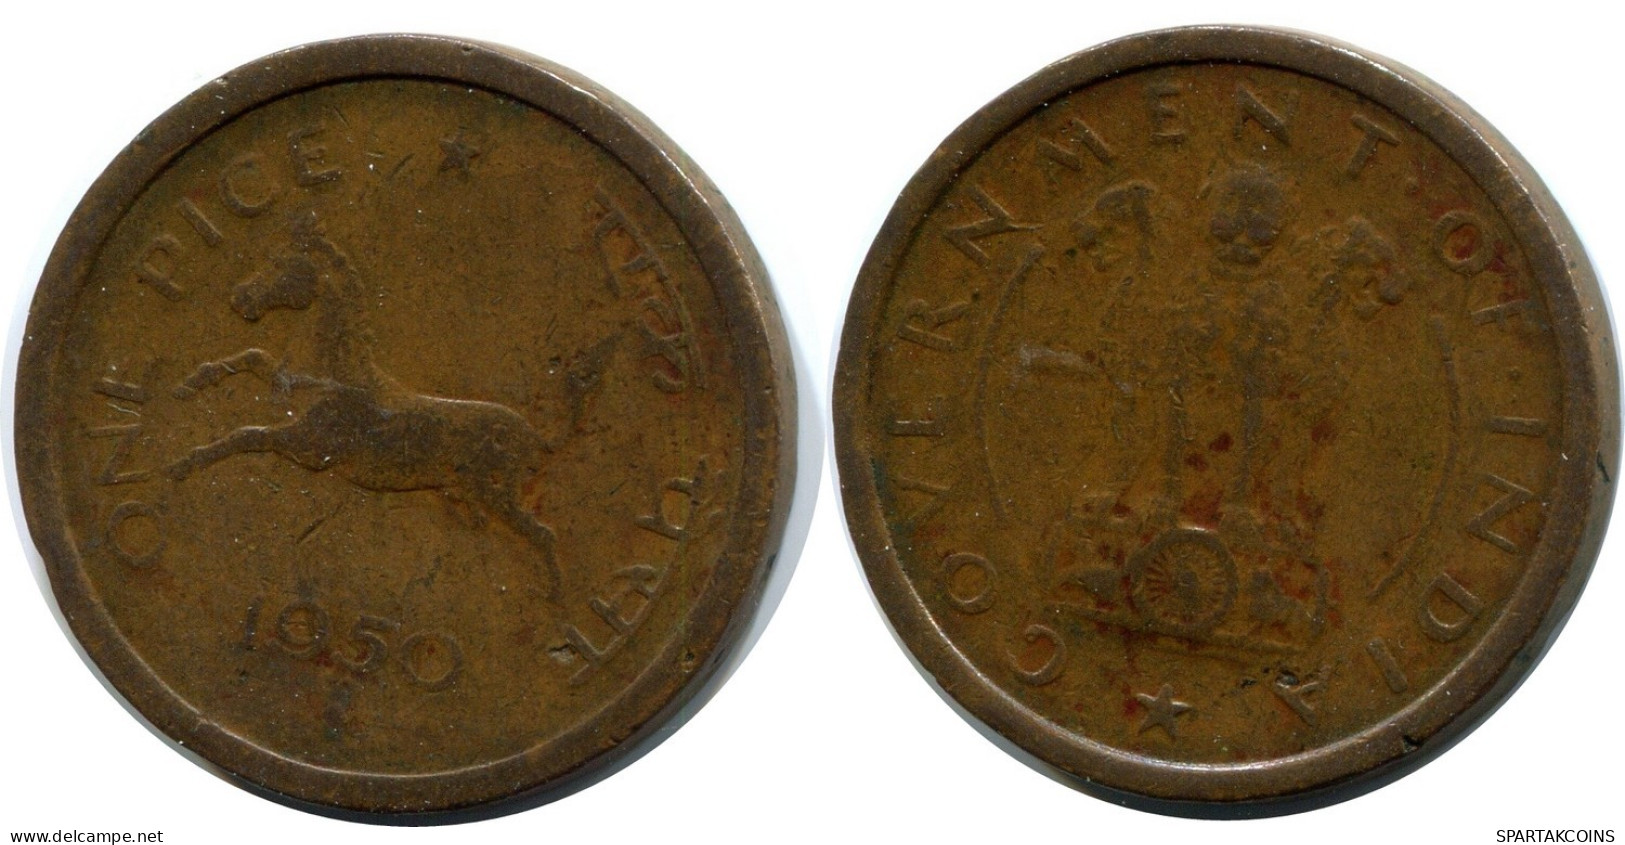 1 PICE 1950 INDIEN INDIA Münze #AY949.D.A - Indien